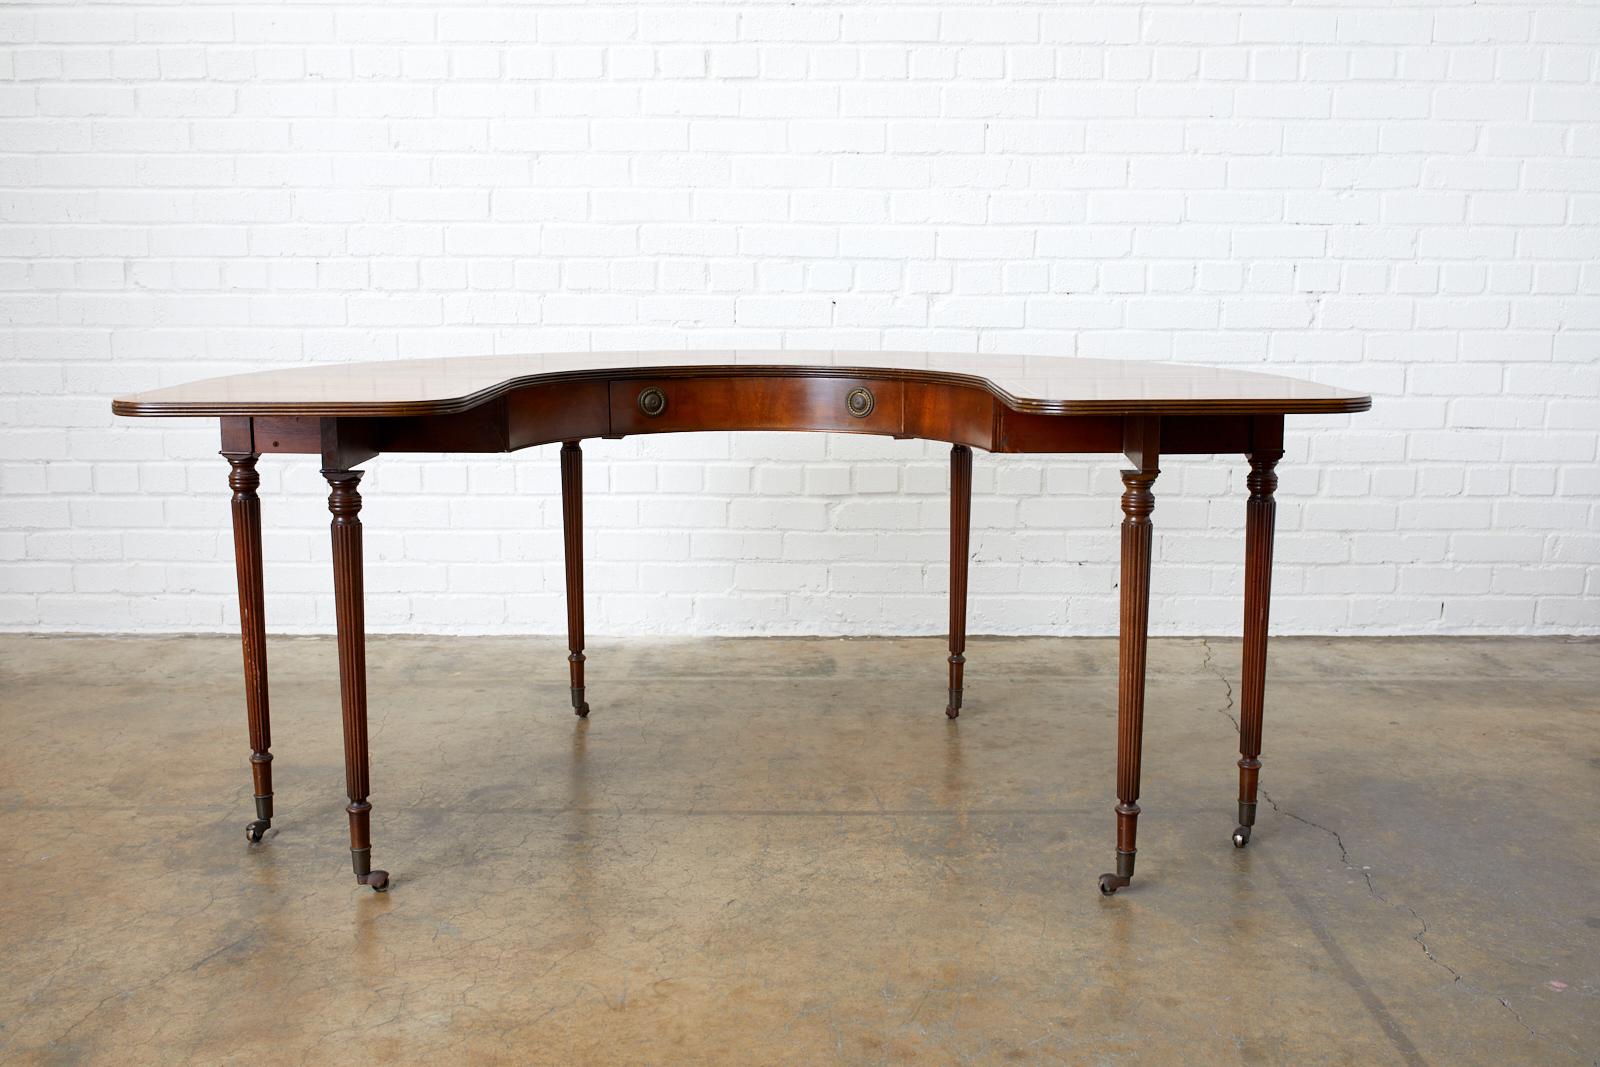 Hand-Crafted English Regency Style Drop-Leaf Hunt Table or Desk